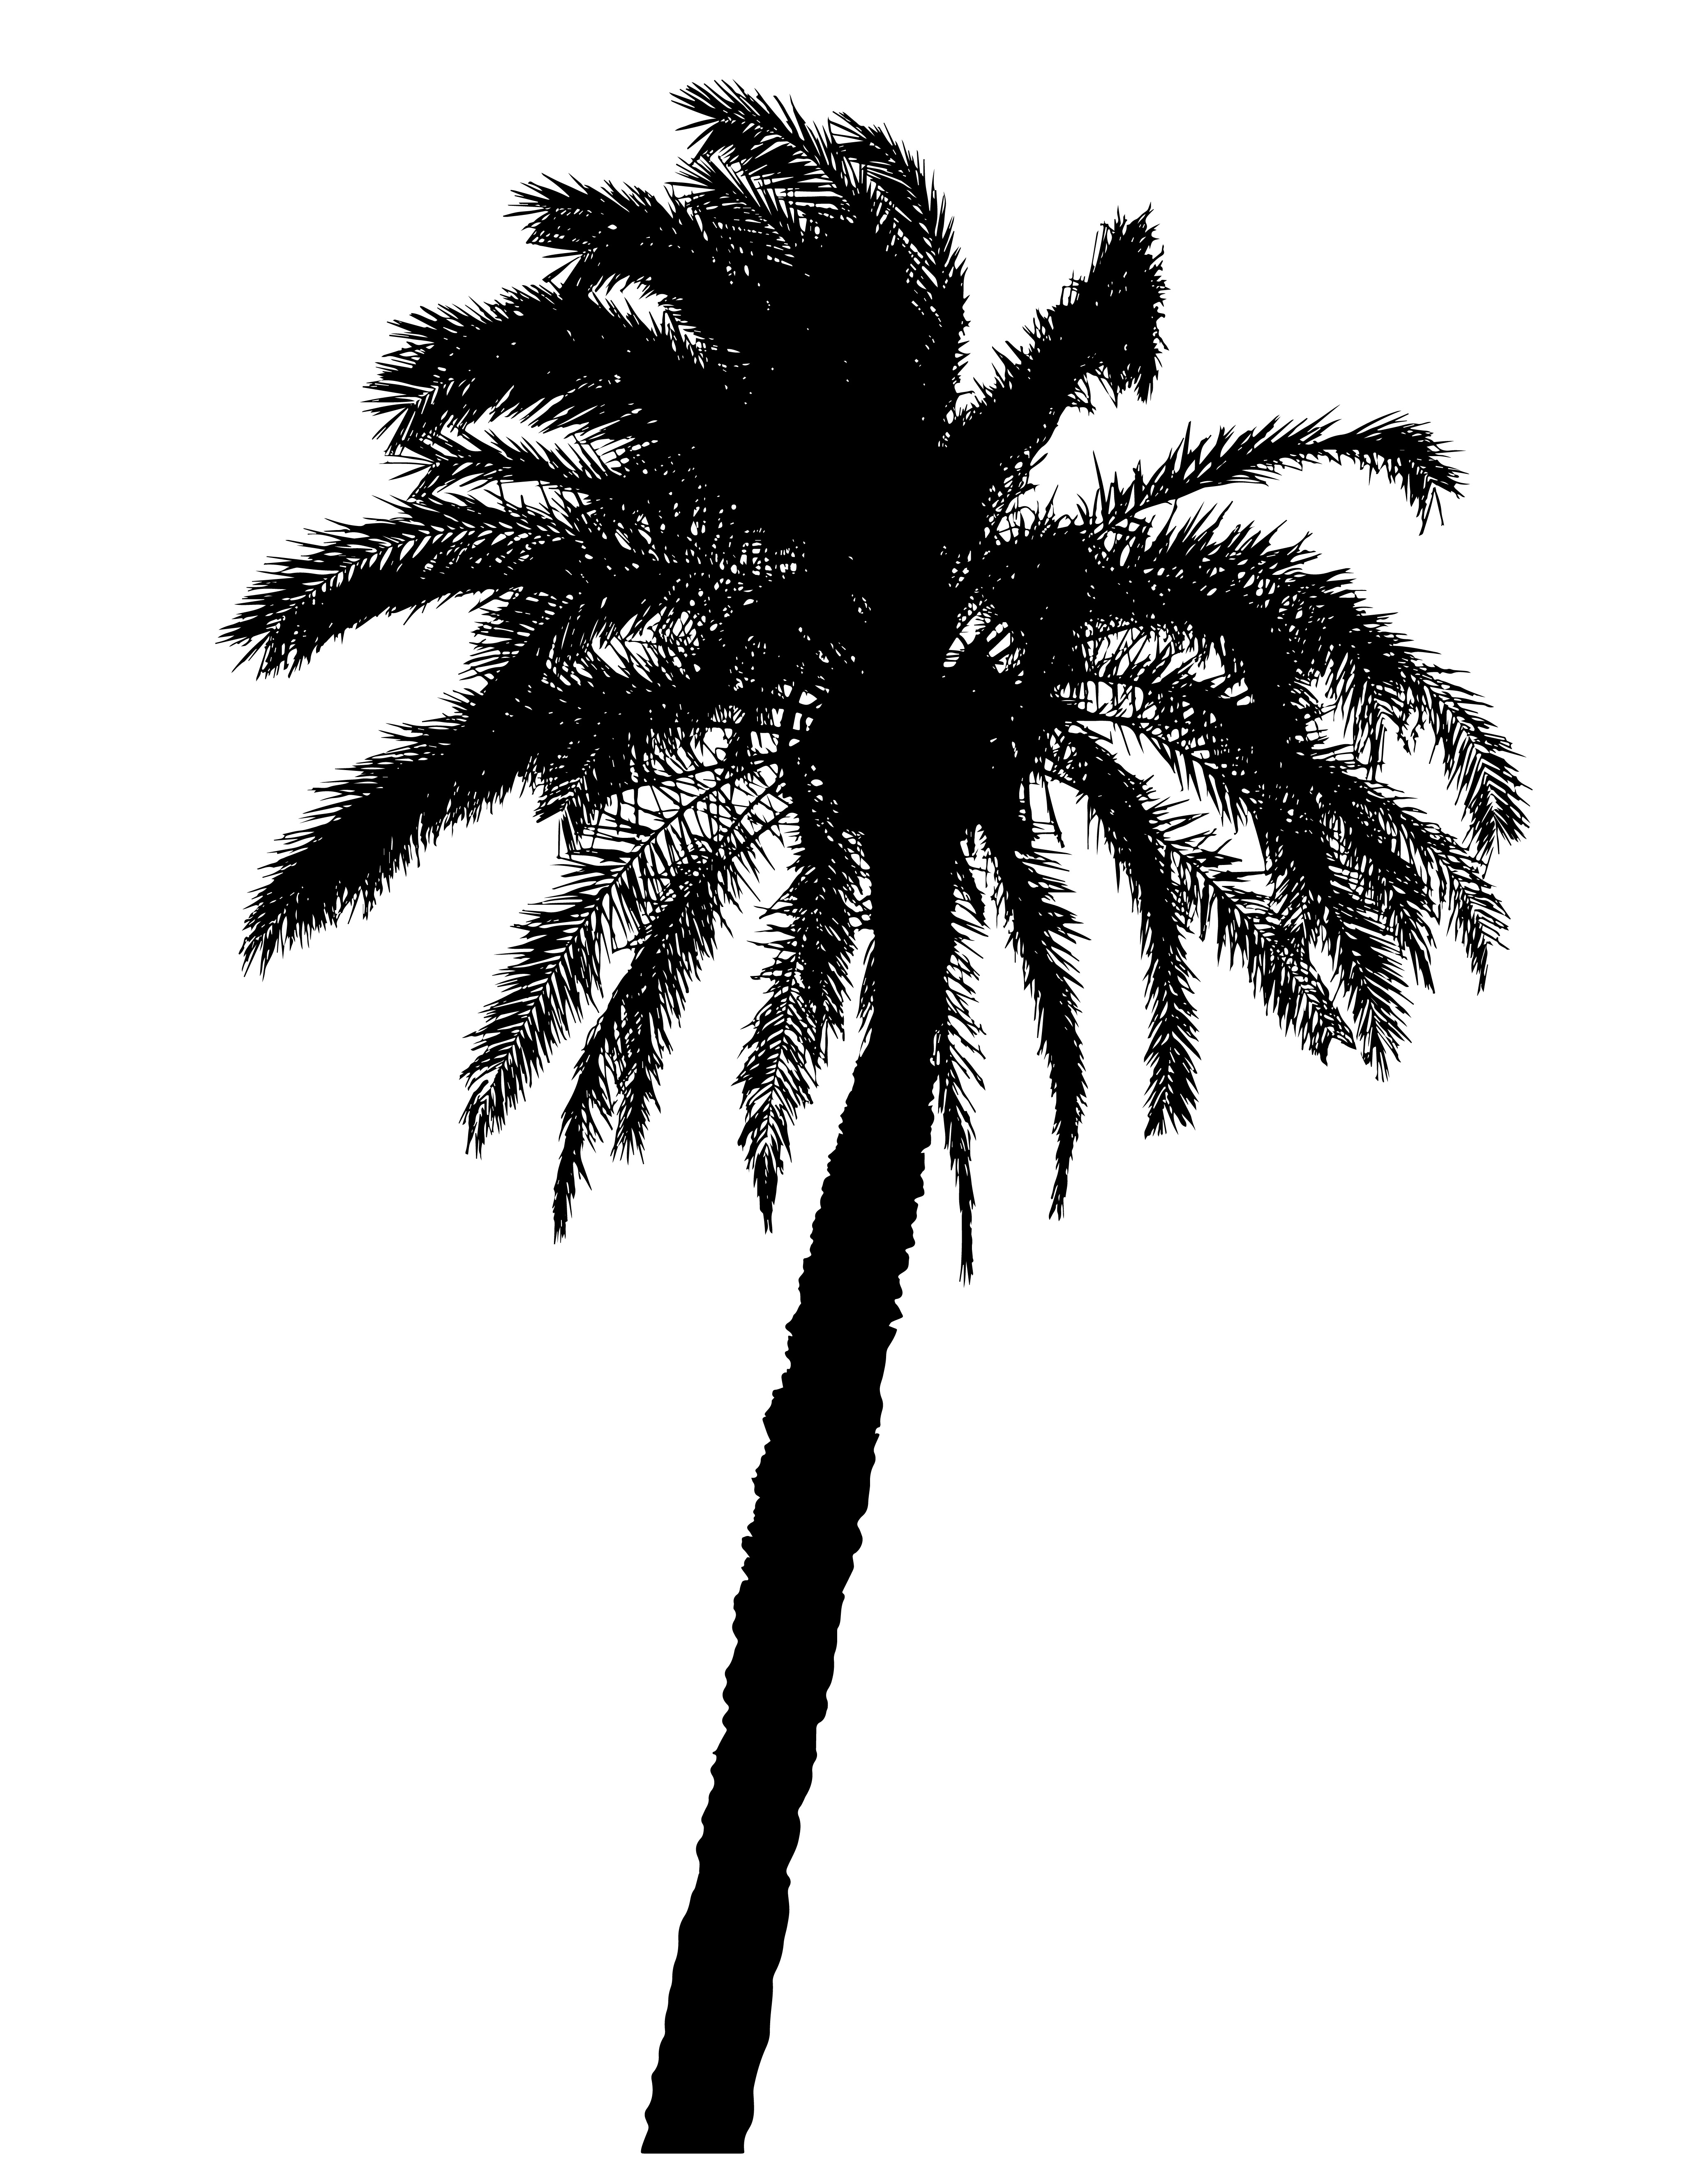 silhouette of palm trees realistic vector illustration